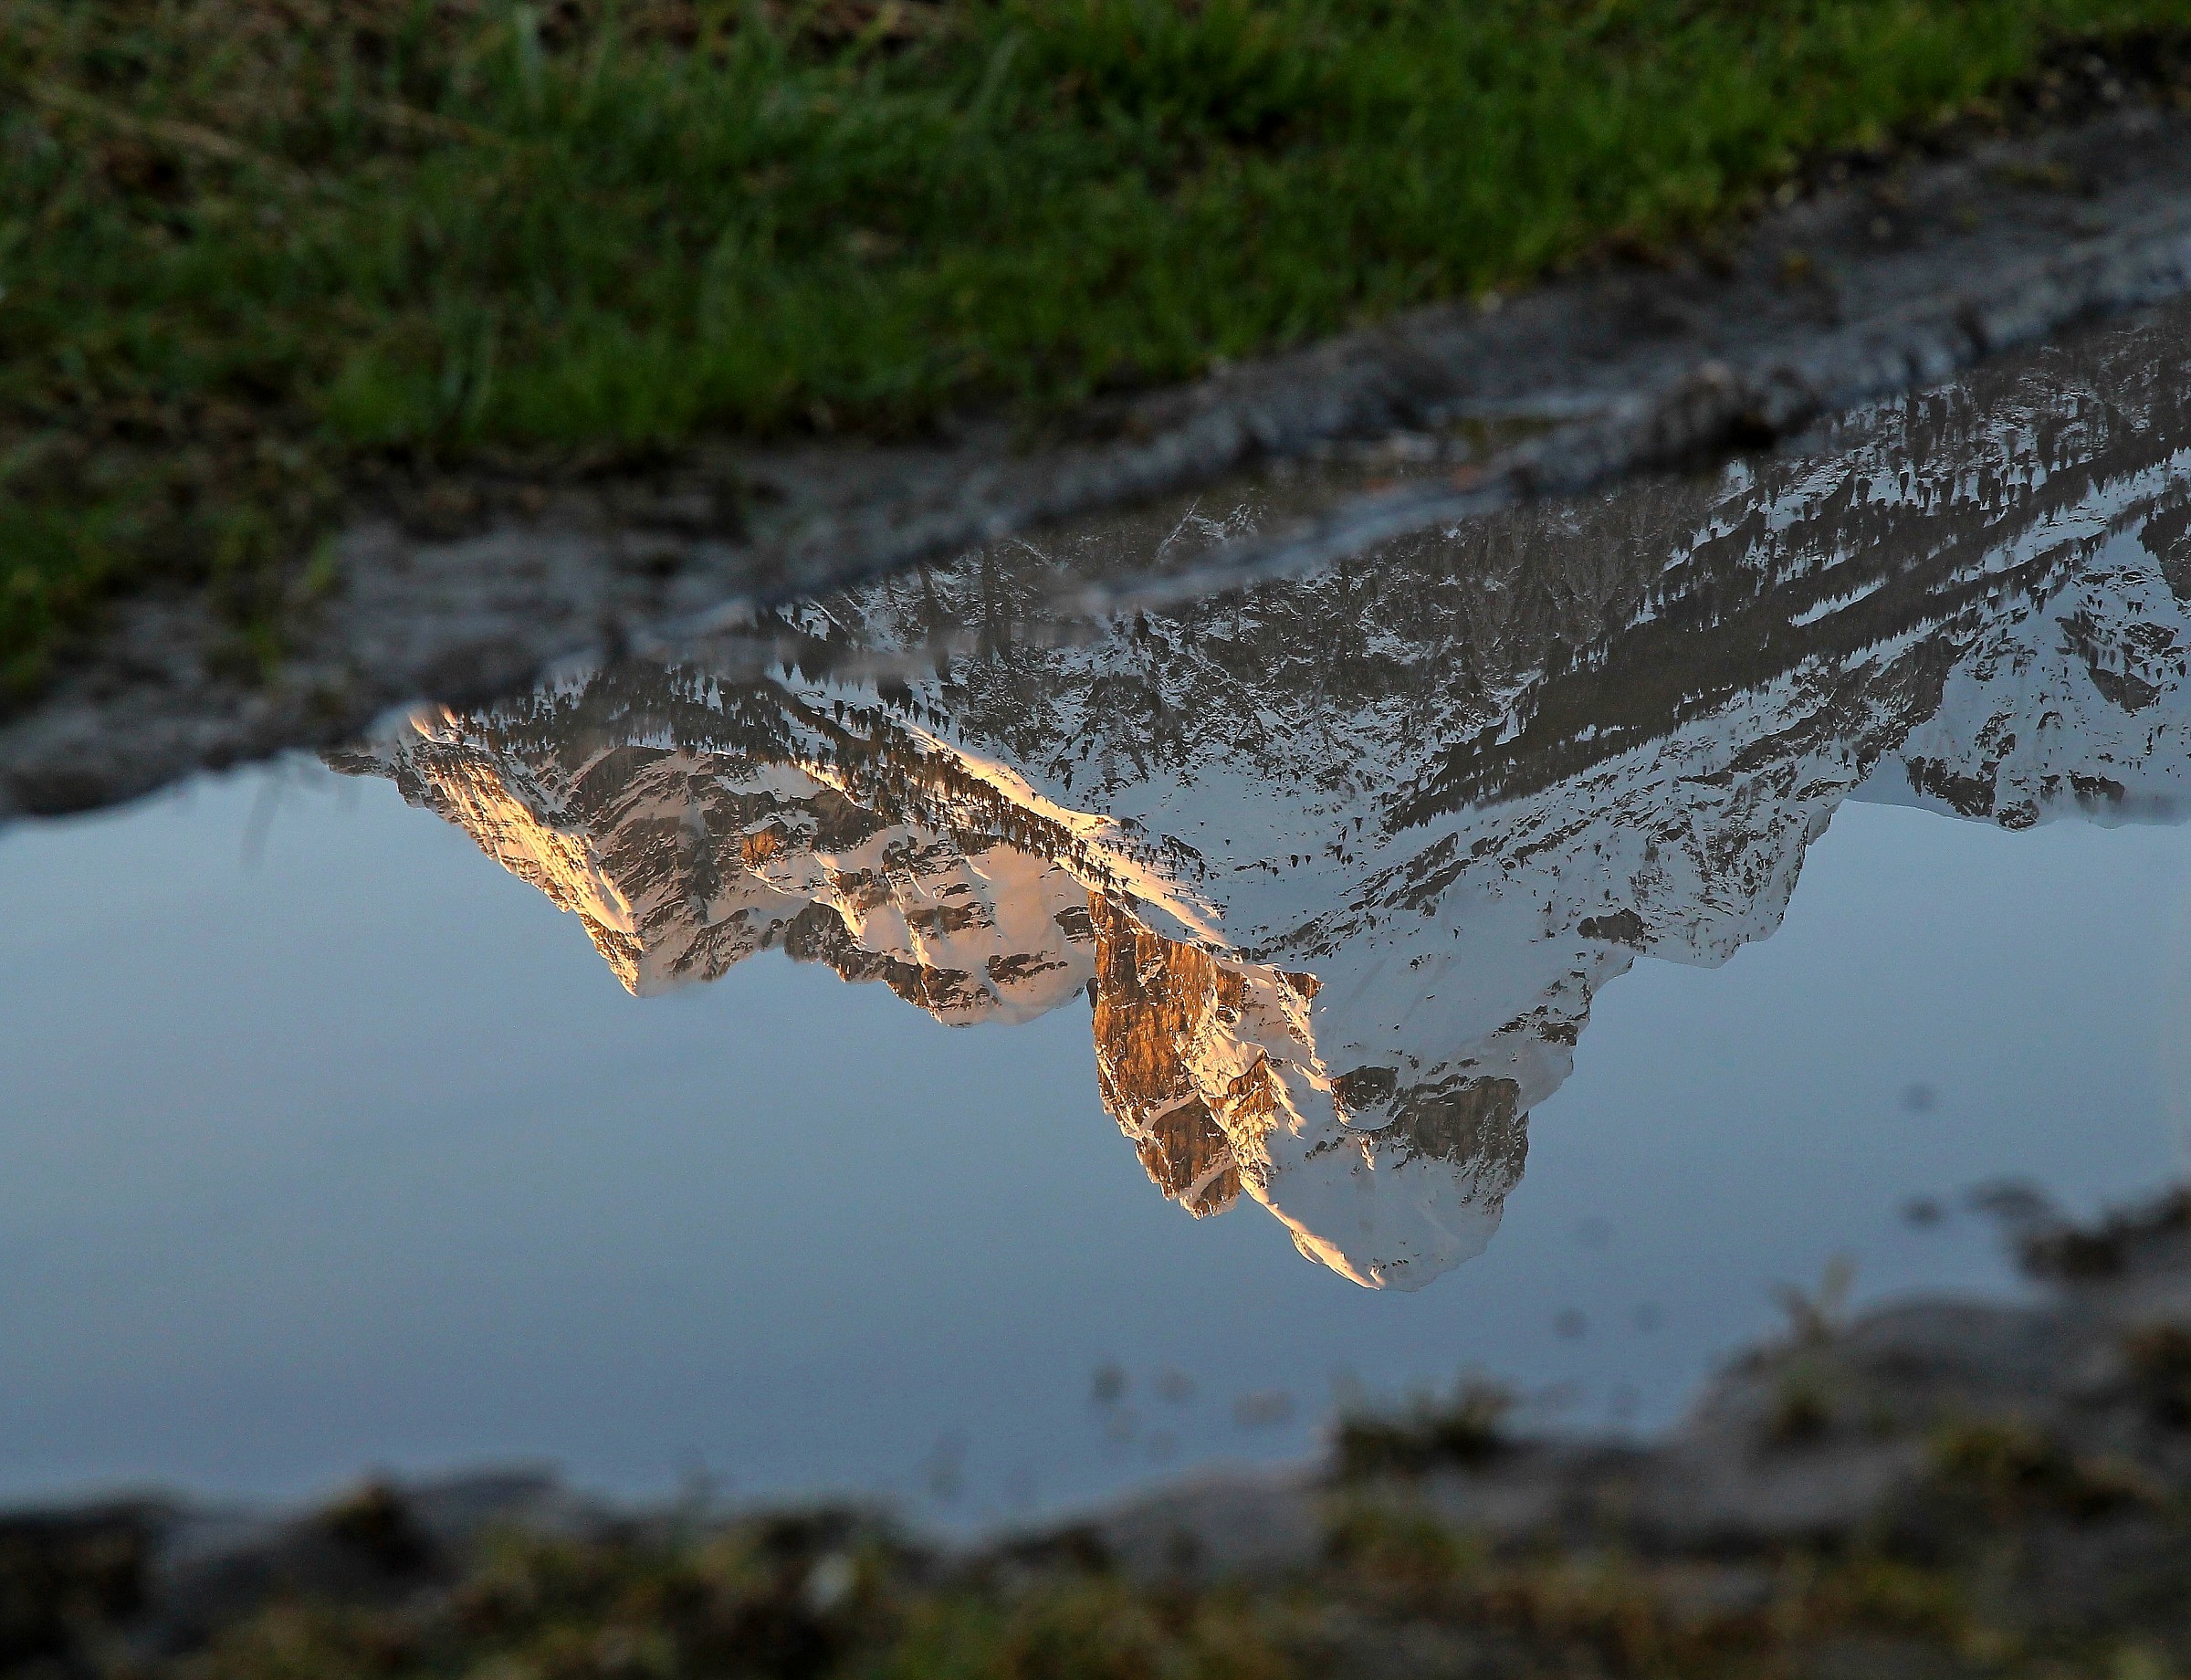 The Monte Pizzocco Mirrored In A Puddle On the Water ........